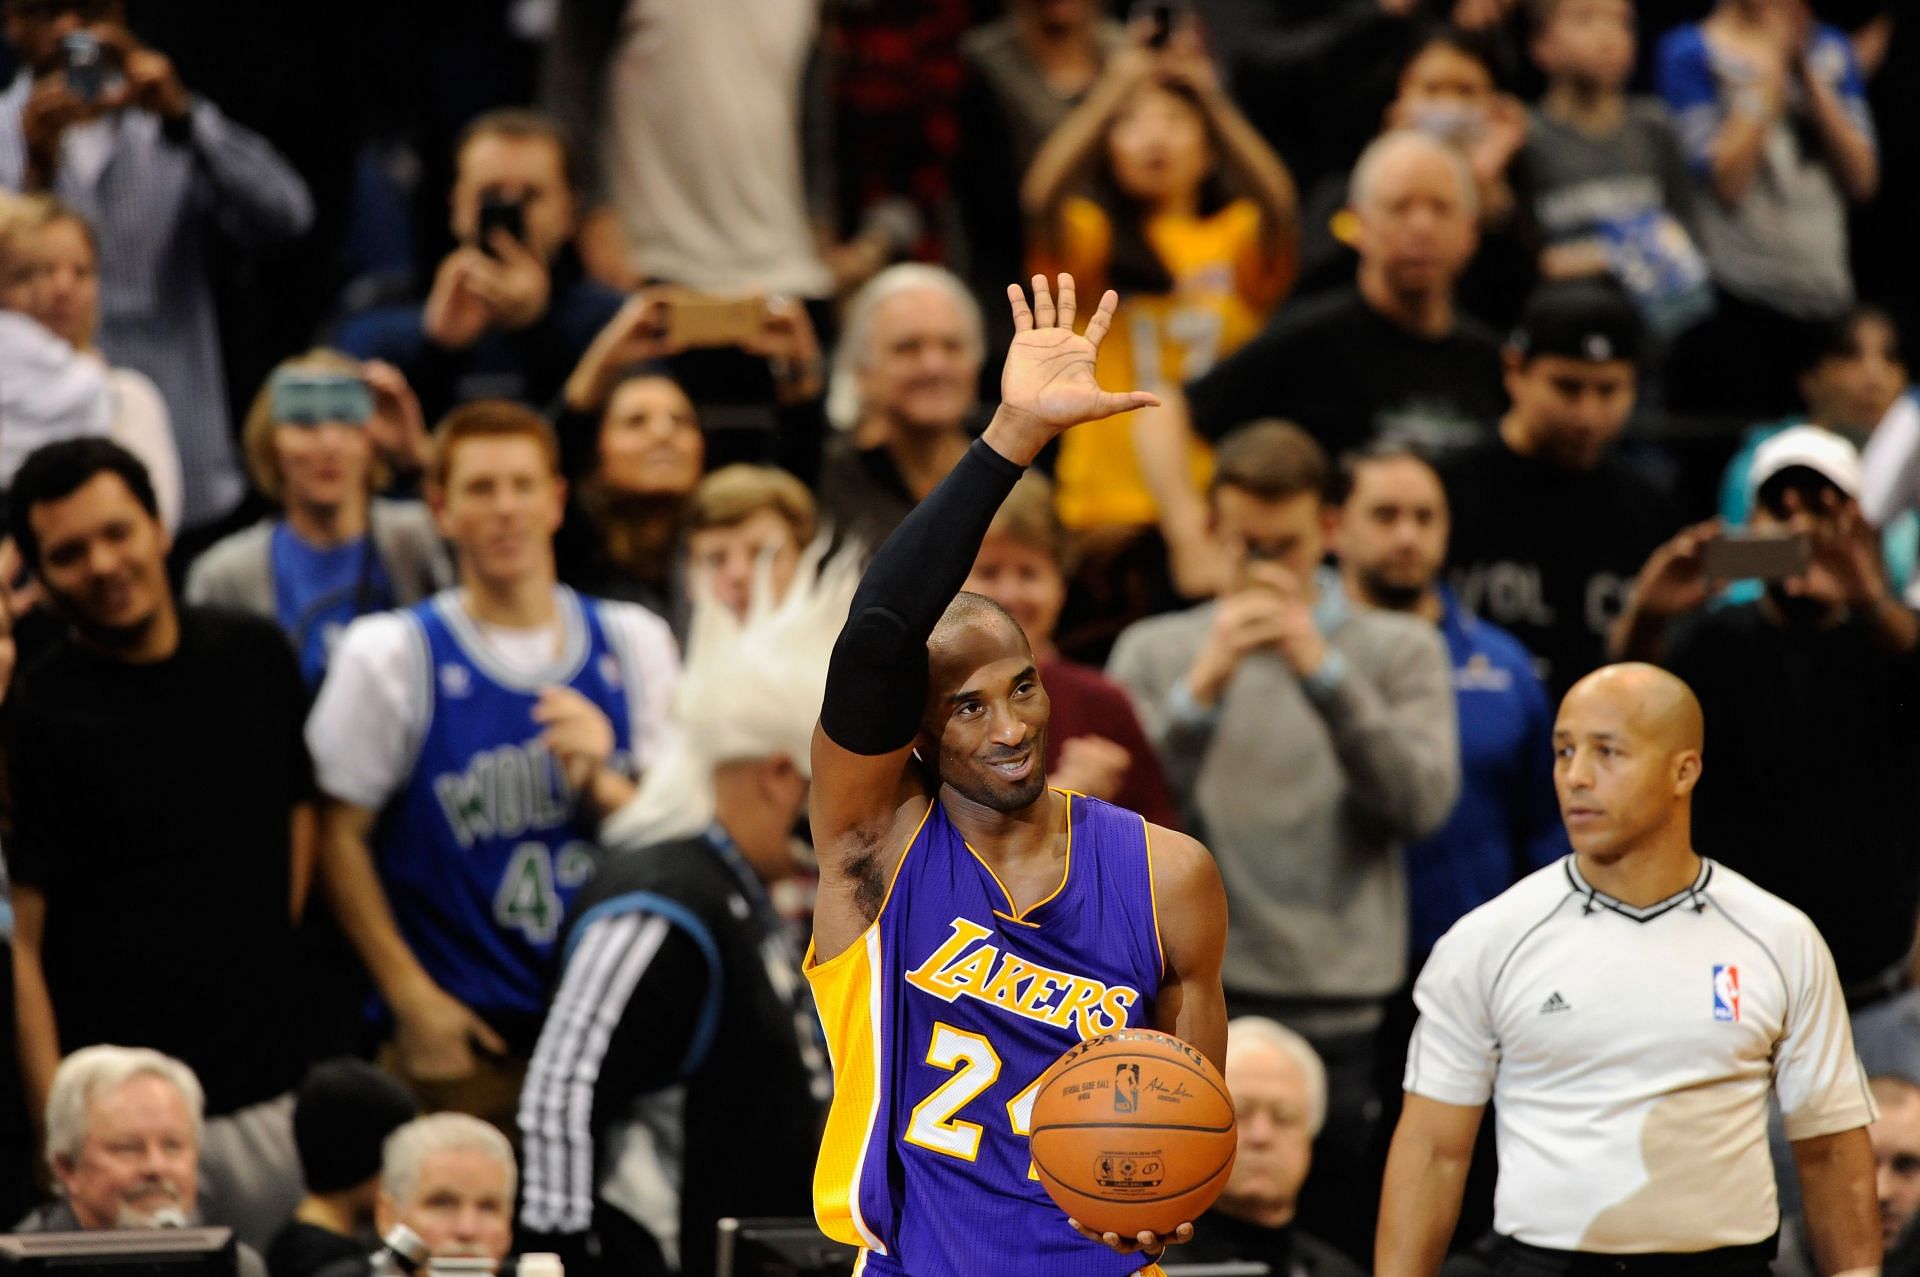 Kobe Bryant #24 of the Los Angeles Lakers waves to the crowd after passing Michael Jordan on the all-time scoring list